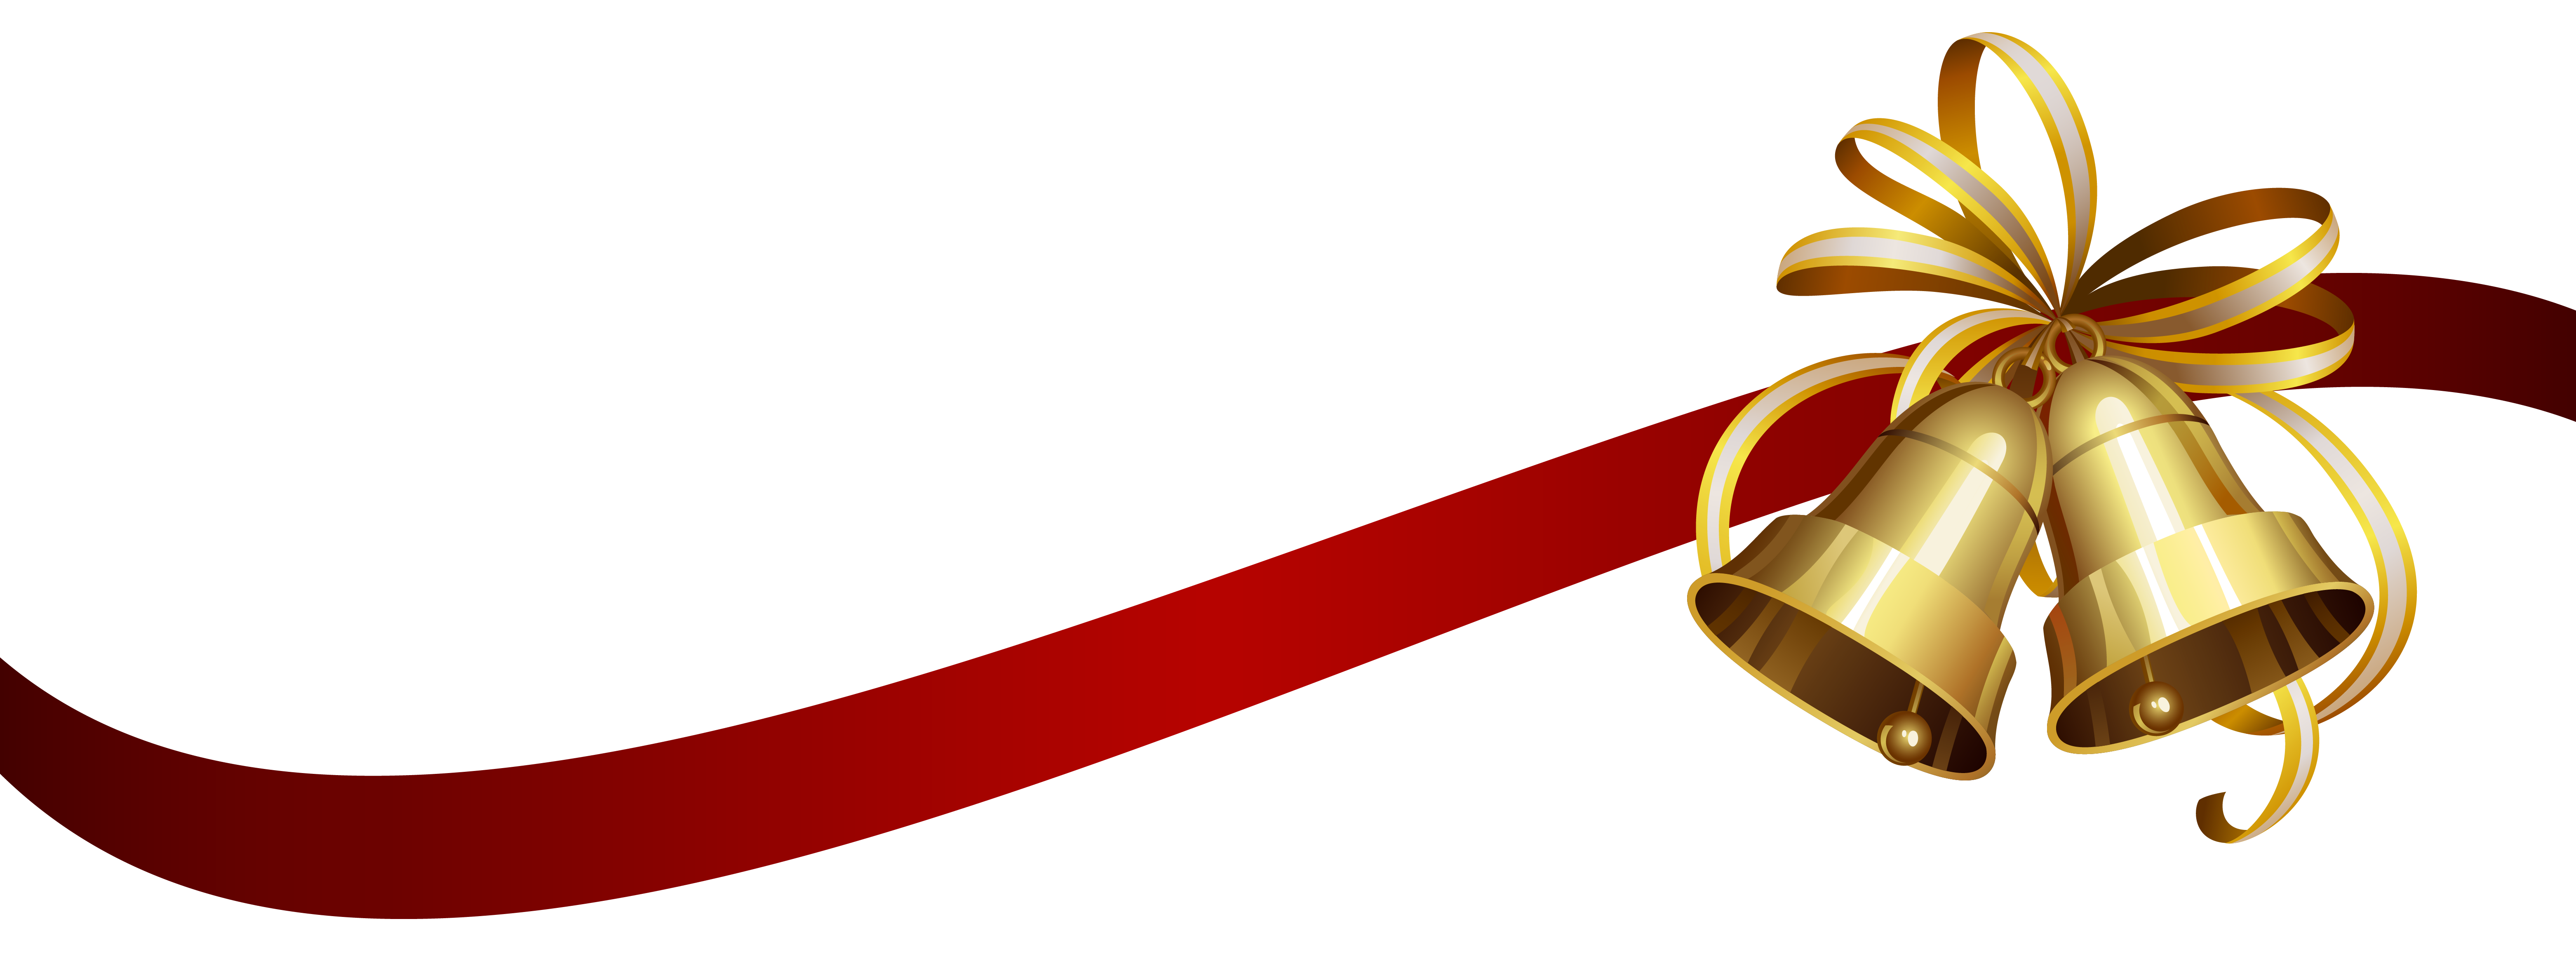 Christmas Golden Bell PNG Image HD